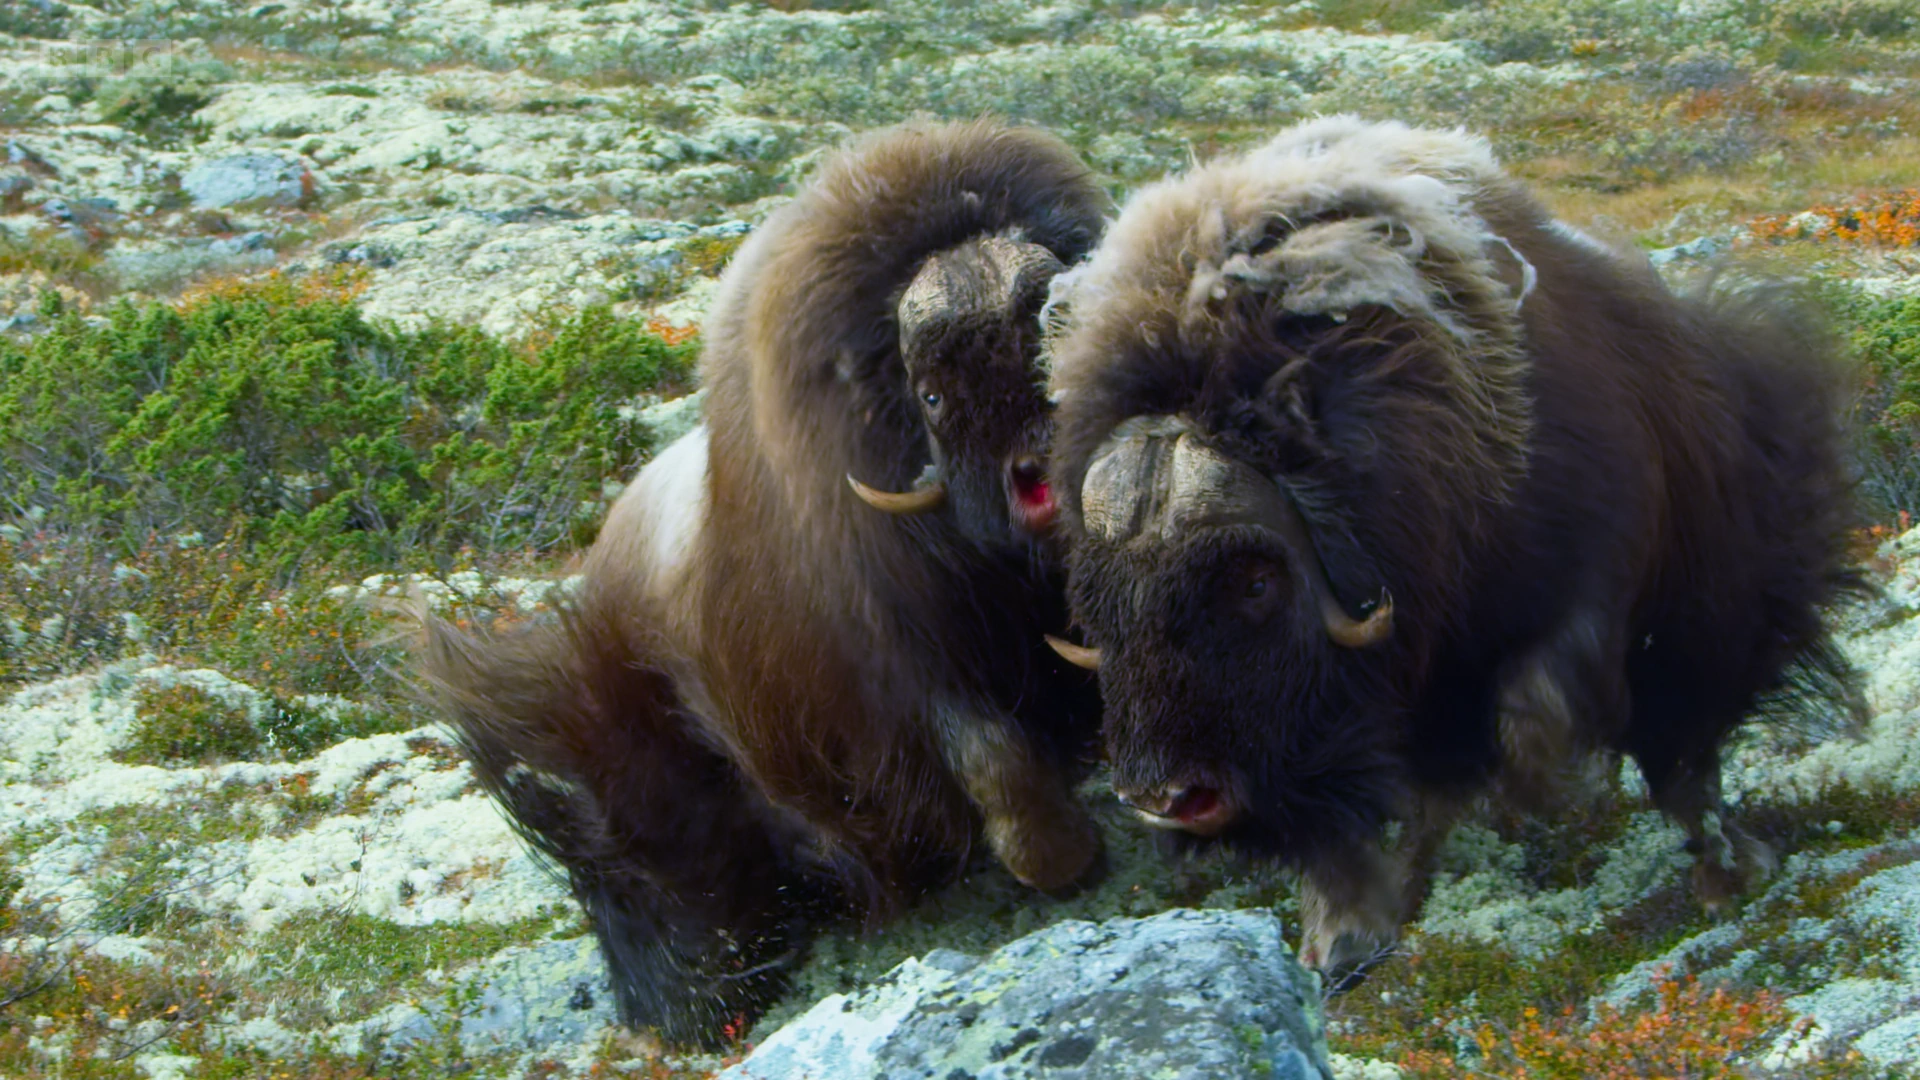 Muskox (Ovibos moschatus) as shown in Seven Worlds, One Planet - Europe